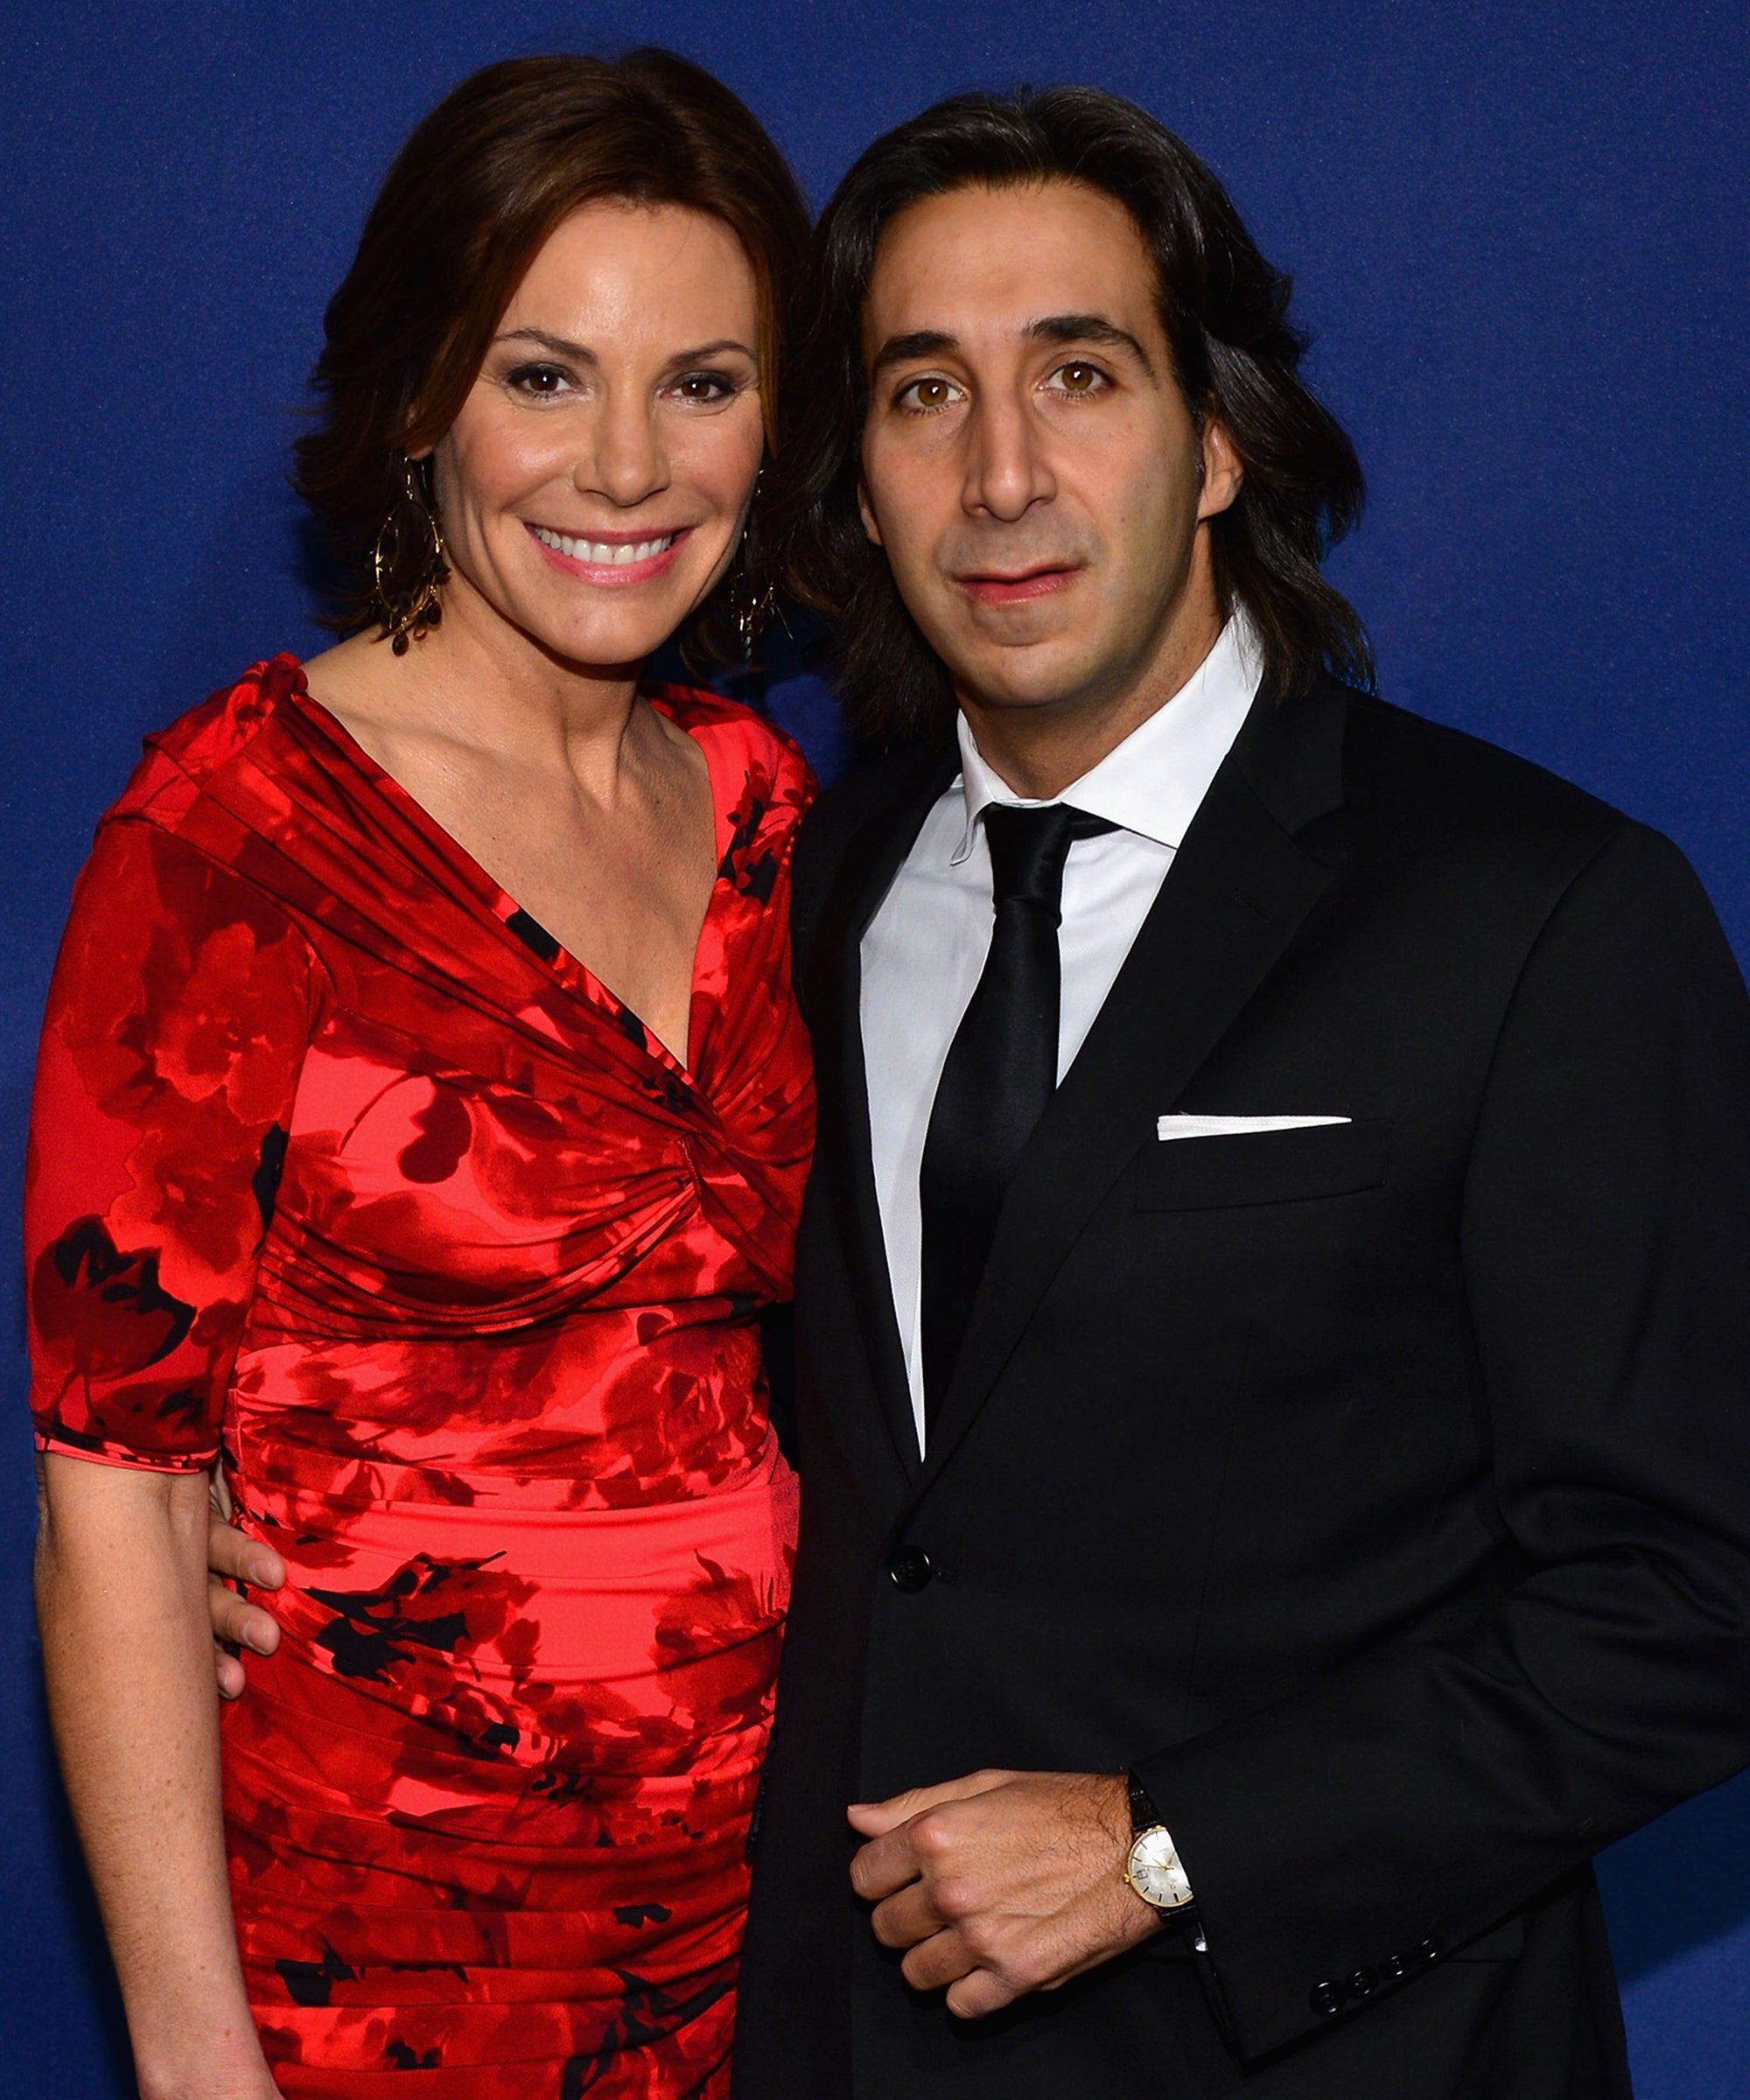 When Did Luann And Jacques Break Up On Real Housewives?